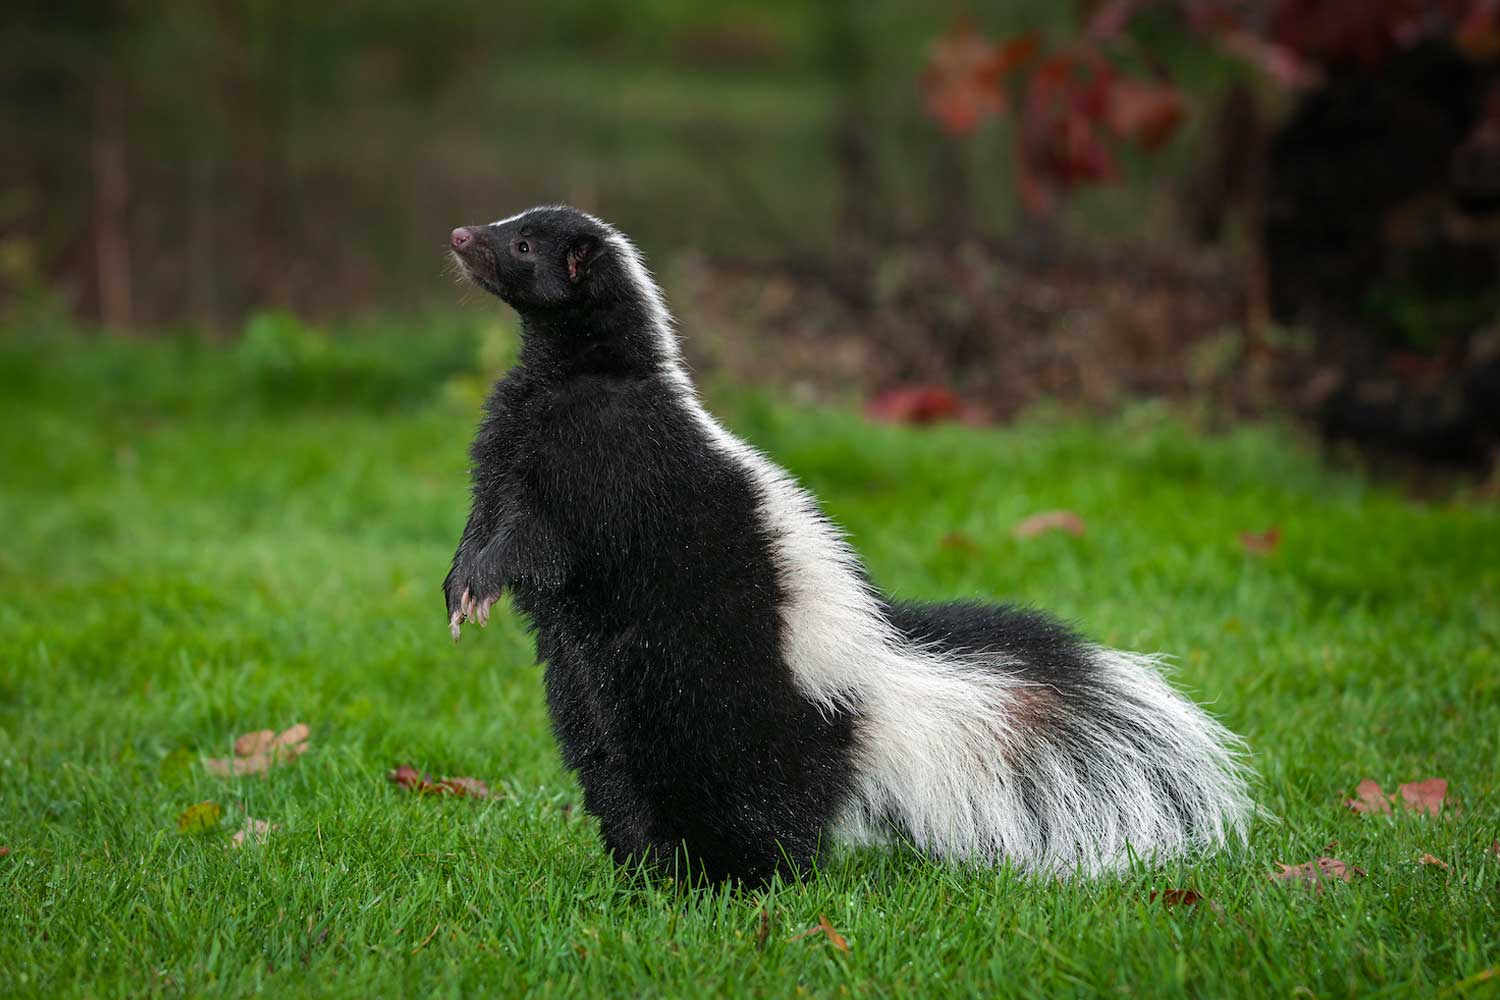 A skunk standing on two legs in the grass.